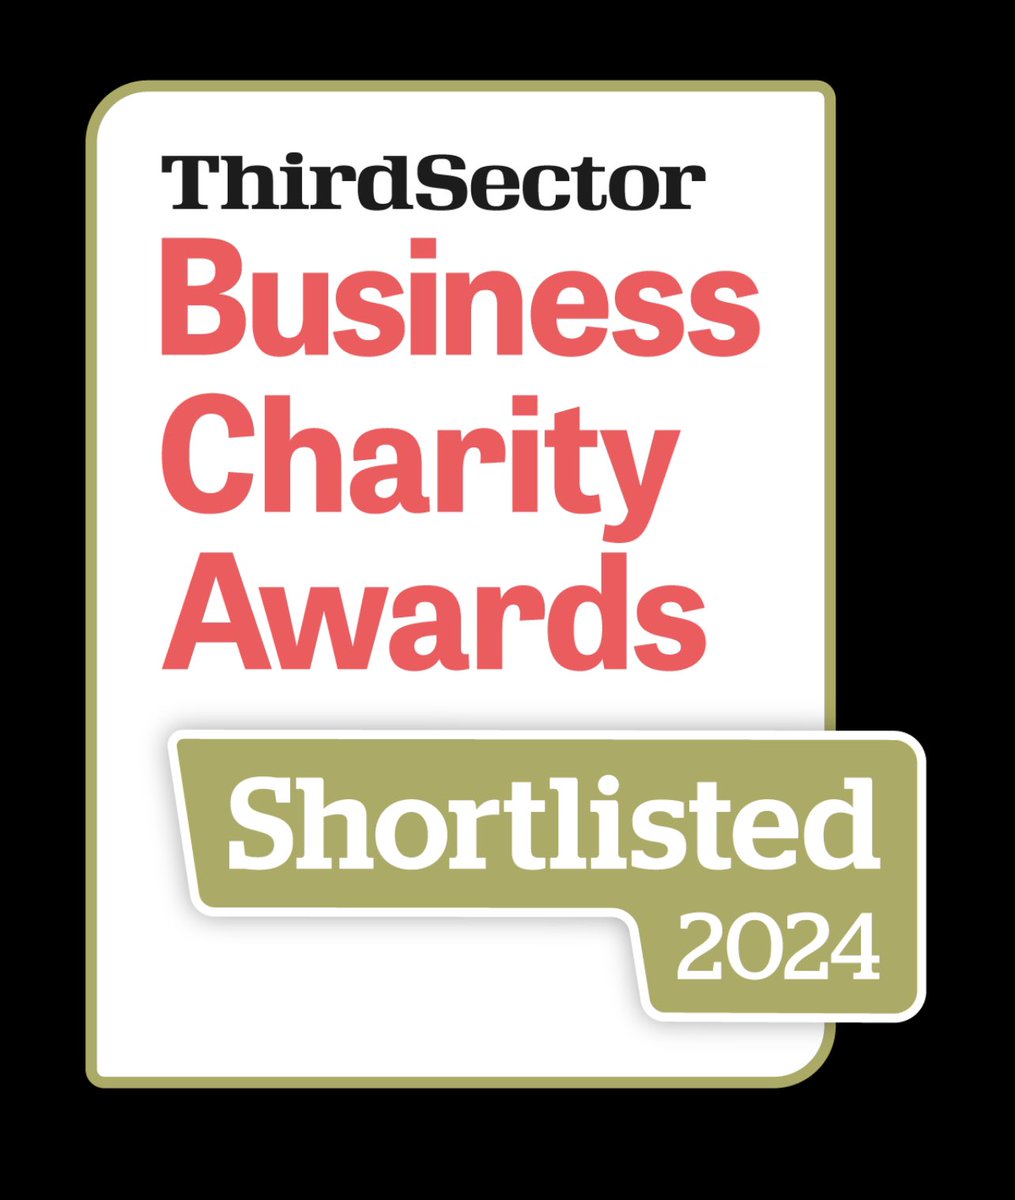 Excited to be here for the #BusinessCharityAwards - will we win the Corporate Foundation Award category? Stay tuned! #nailbiting #fingerscrossed